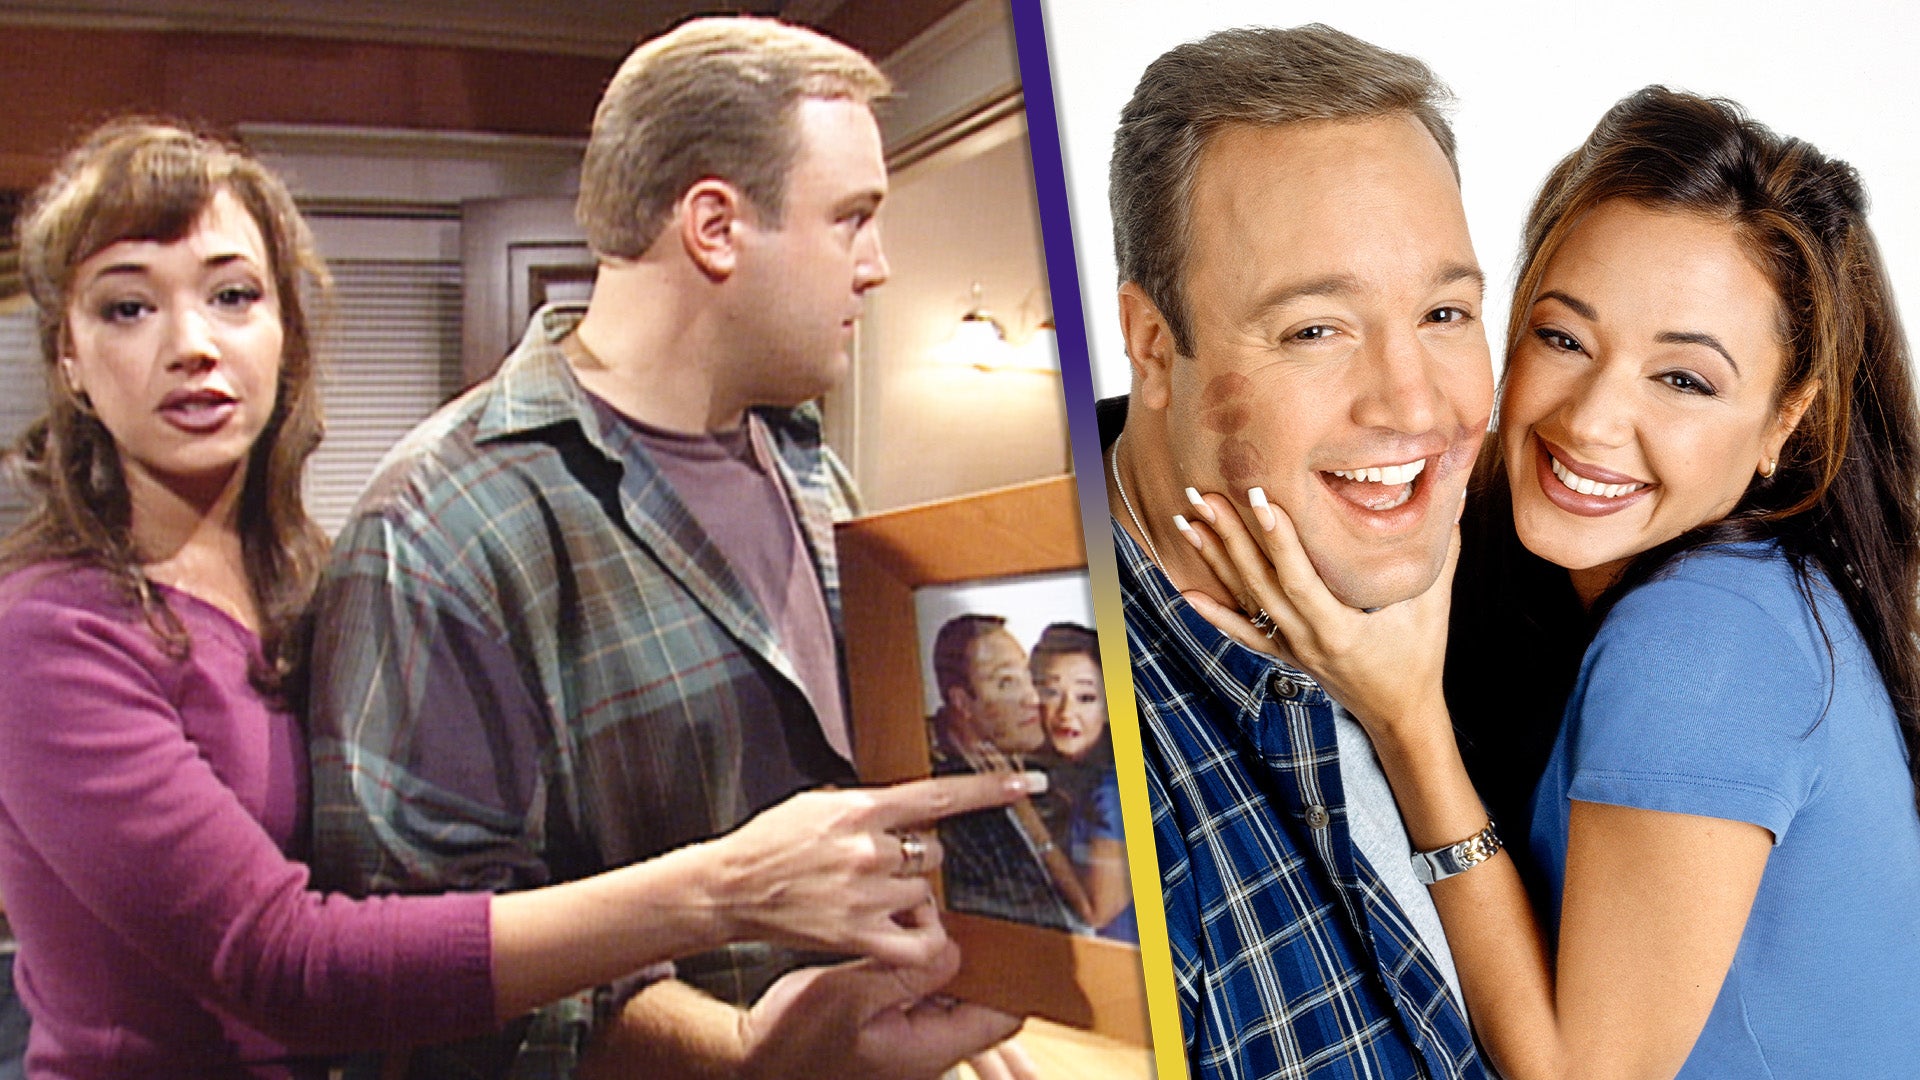 Leah Remini to Reunite With 'The King of Queens' Costar Kevin James